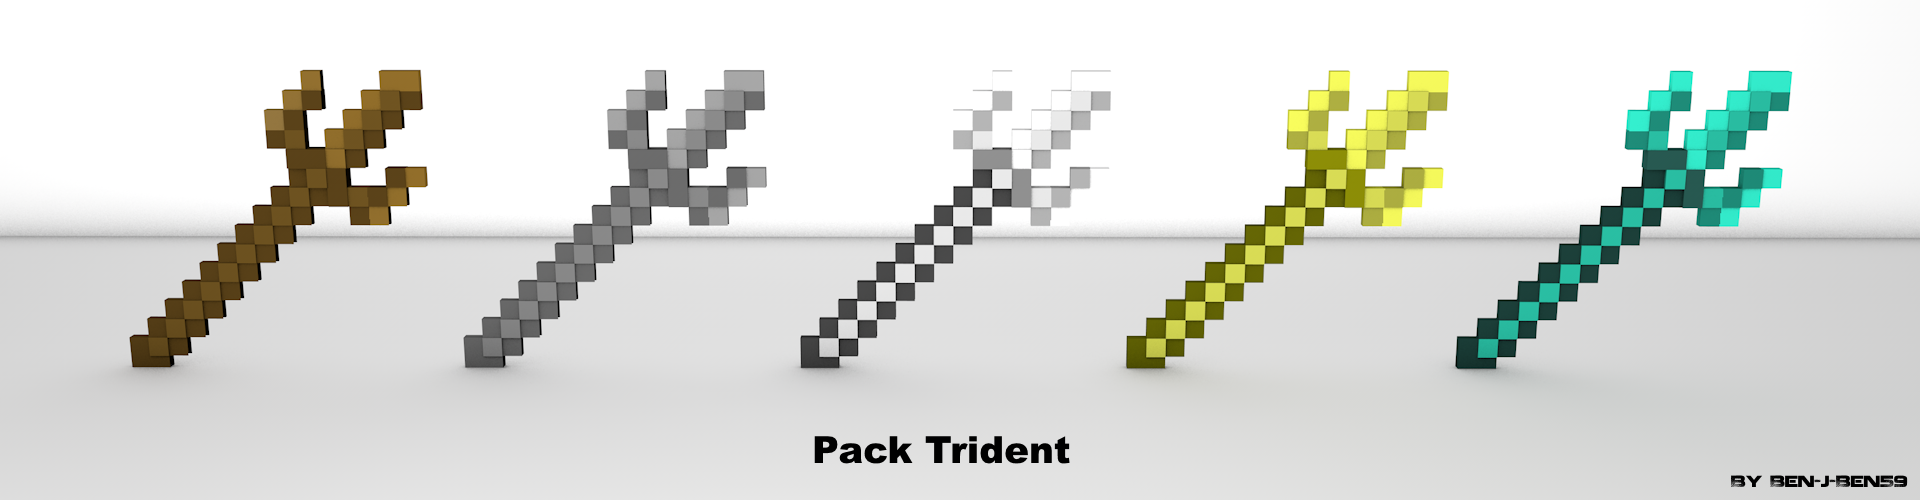 Pack Trident.png